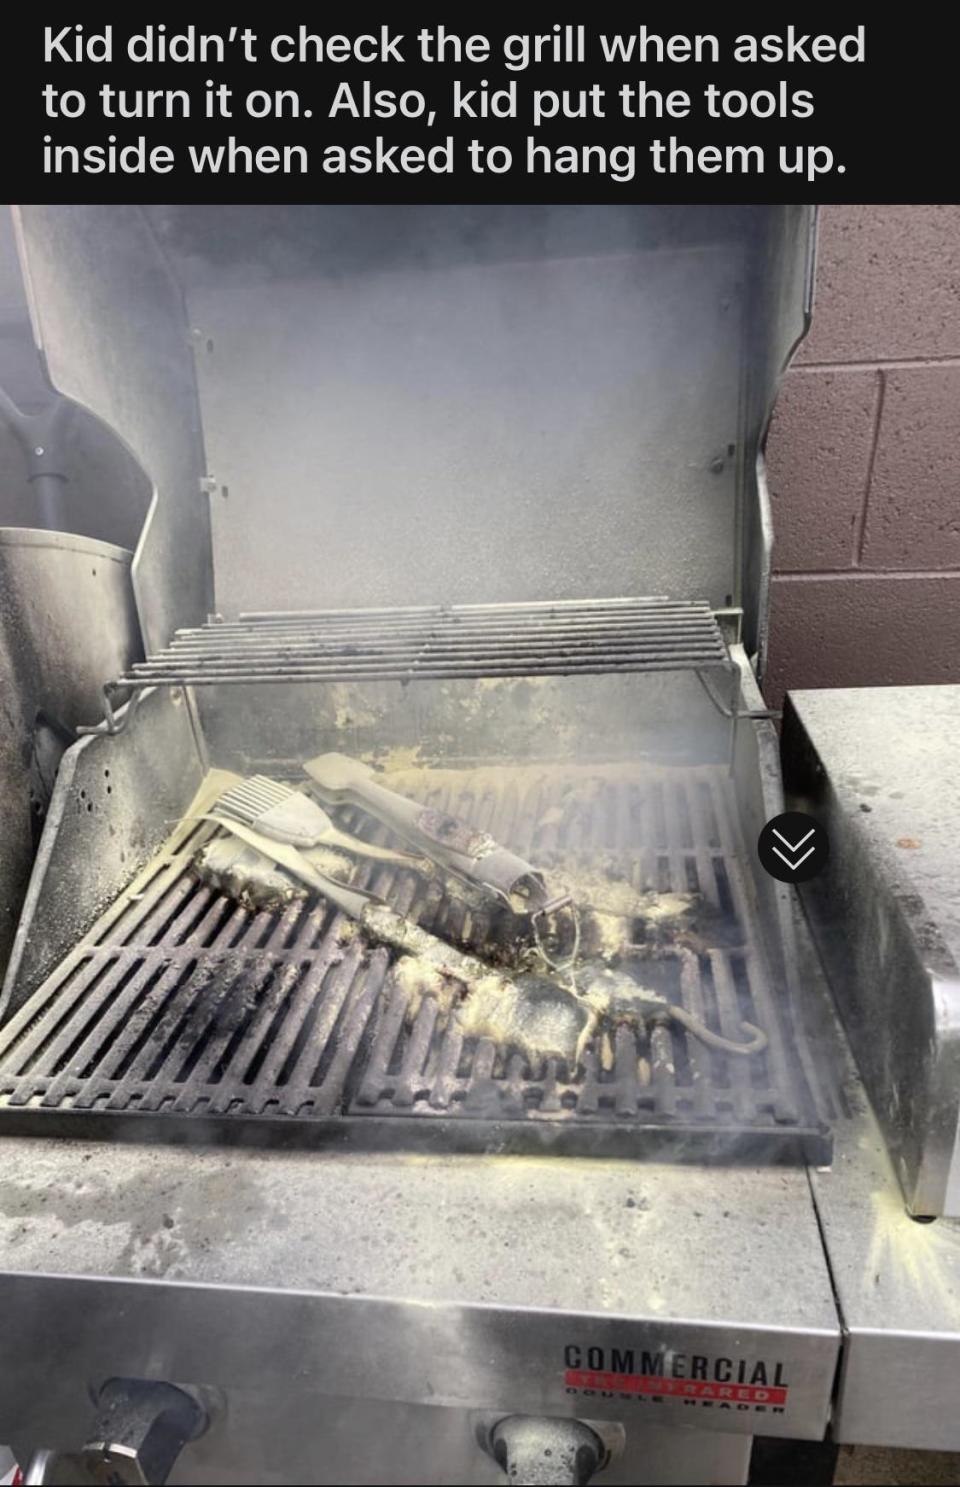 Burnt utensils on the grill because their kid didn't check it before turning it on and put the utensils inside it instead of hanging them up